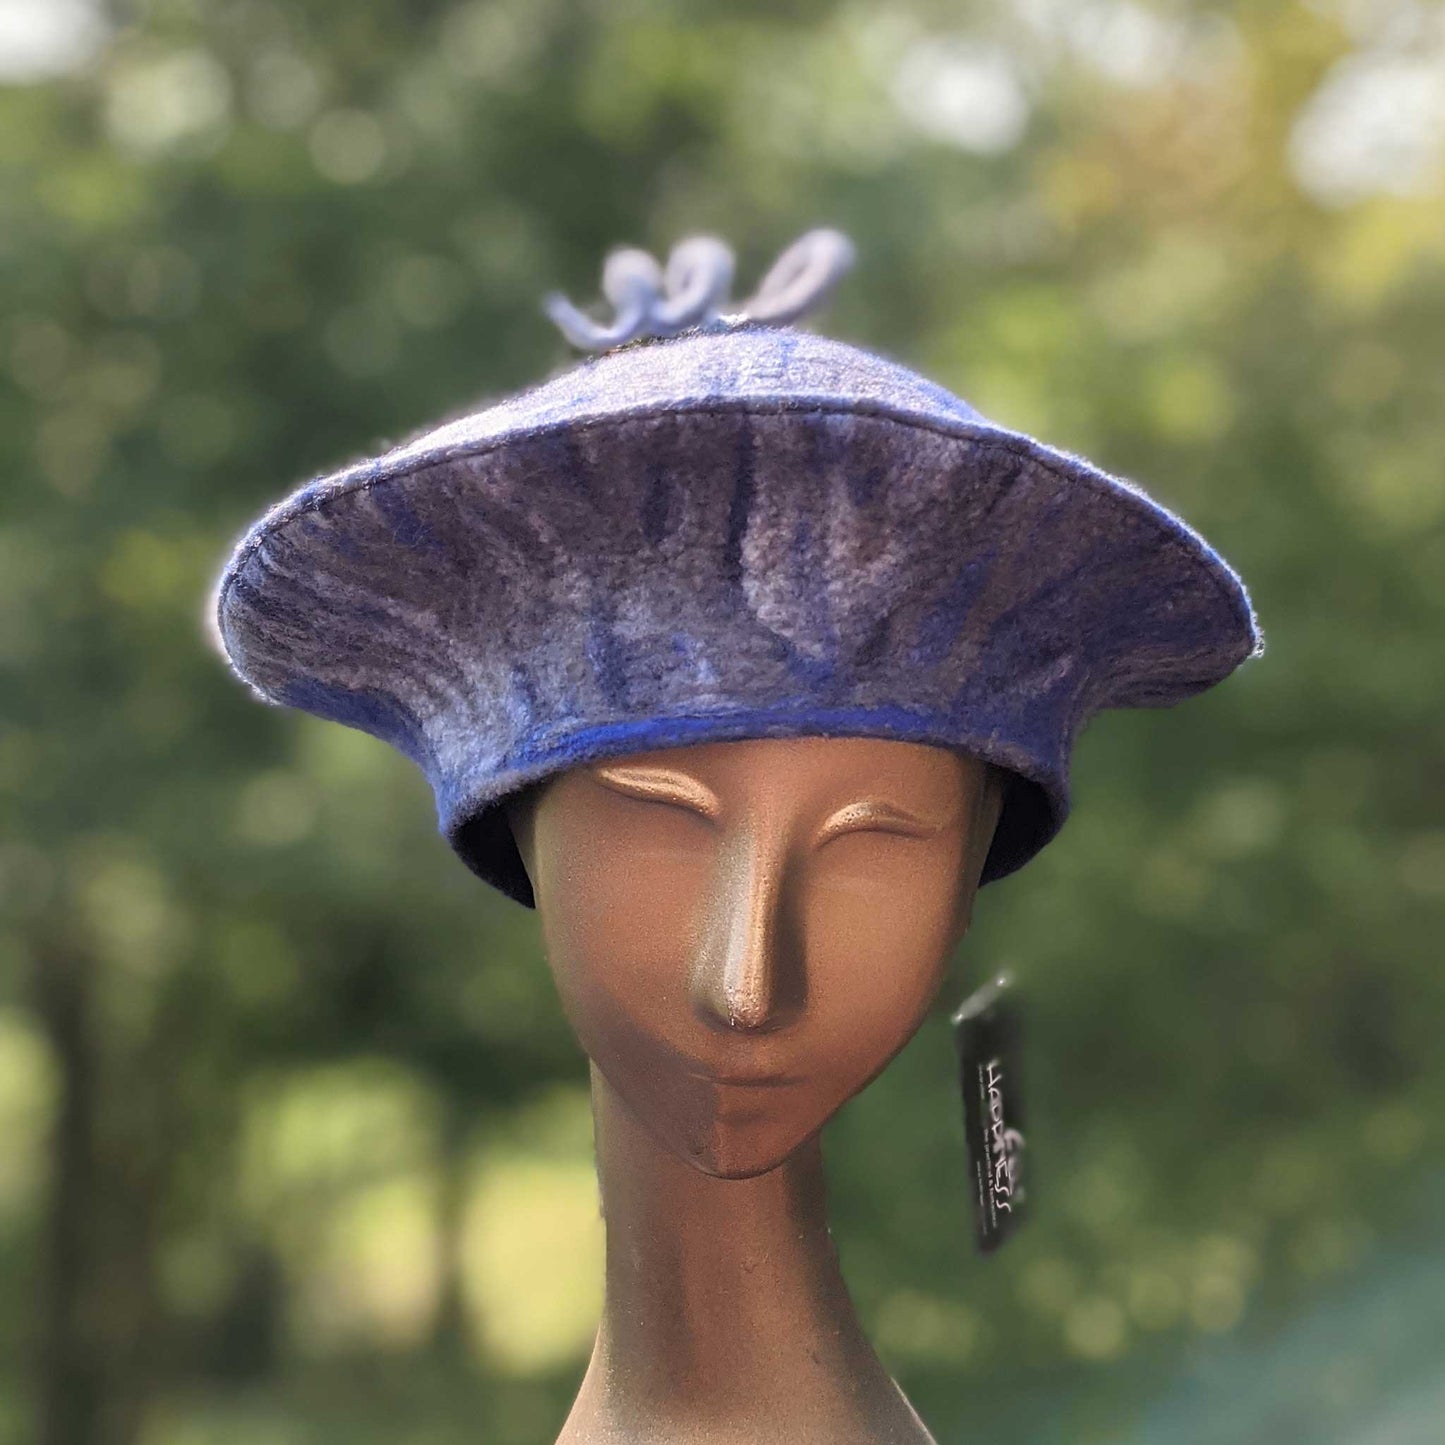 Blue and Gray Curlicue Beret - on mannequin head